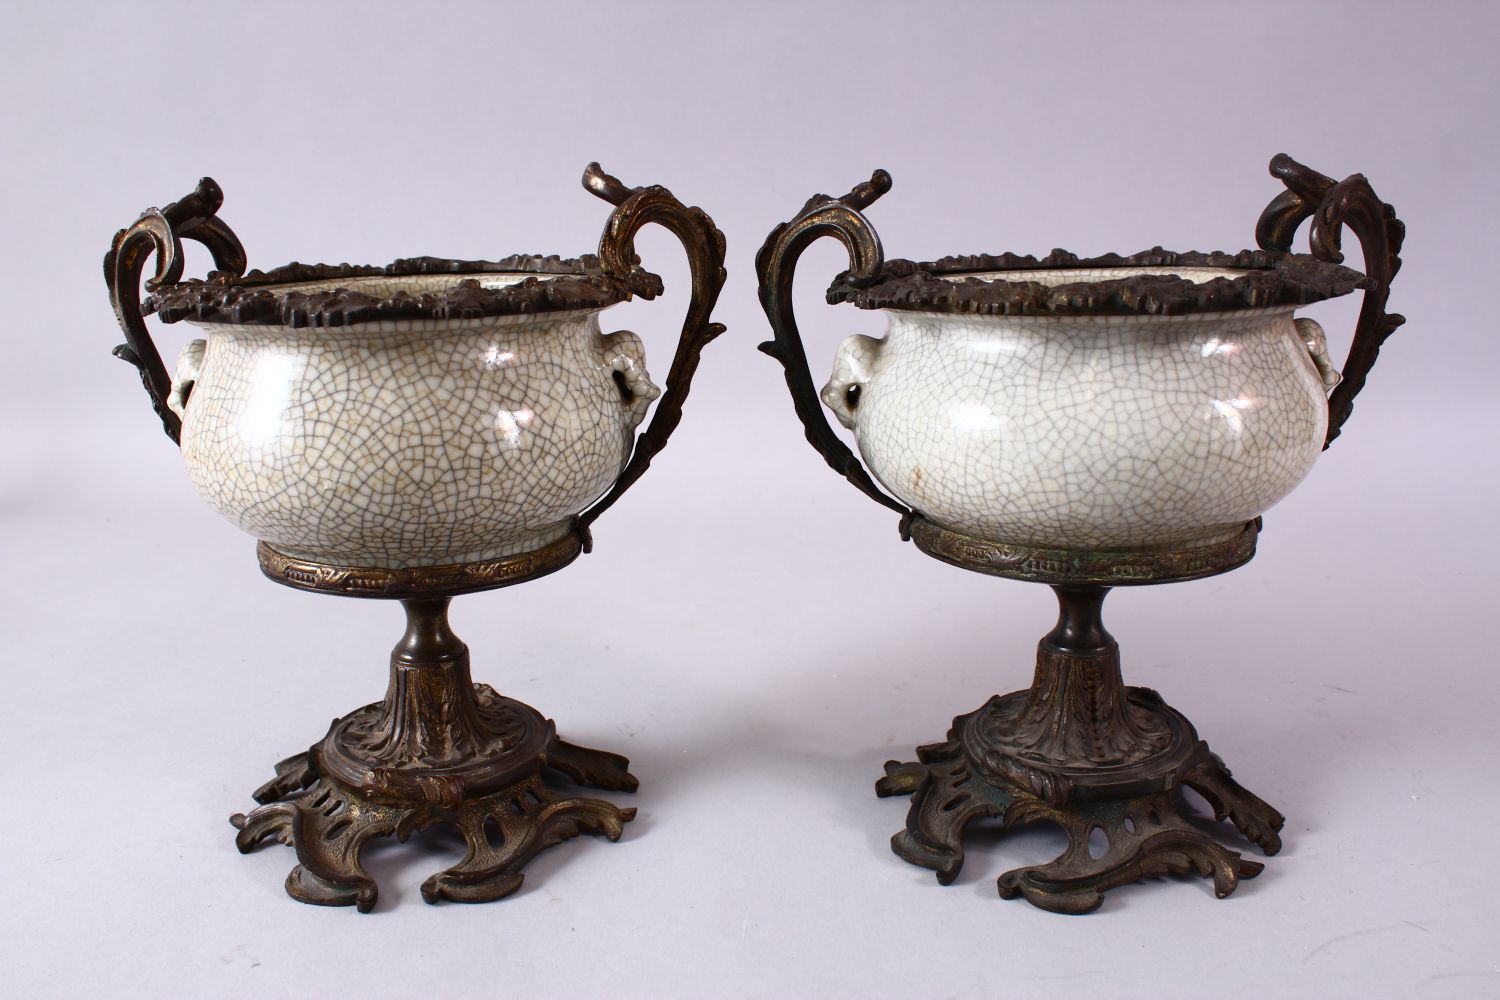 A PAIR OF 19TH/20TH CENTURY CHINESE GUAN WARE POTTERY BOWLS with ormolu mounts, the bowls with - Image 3 of 7